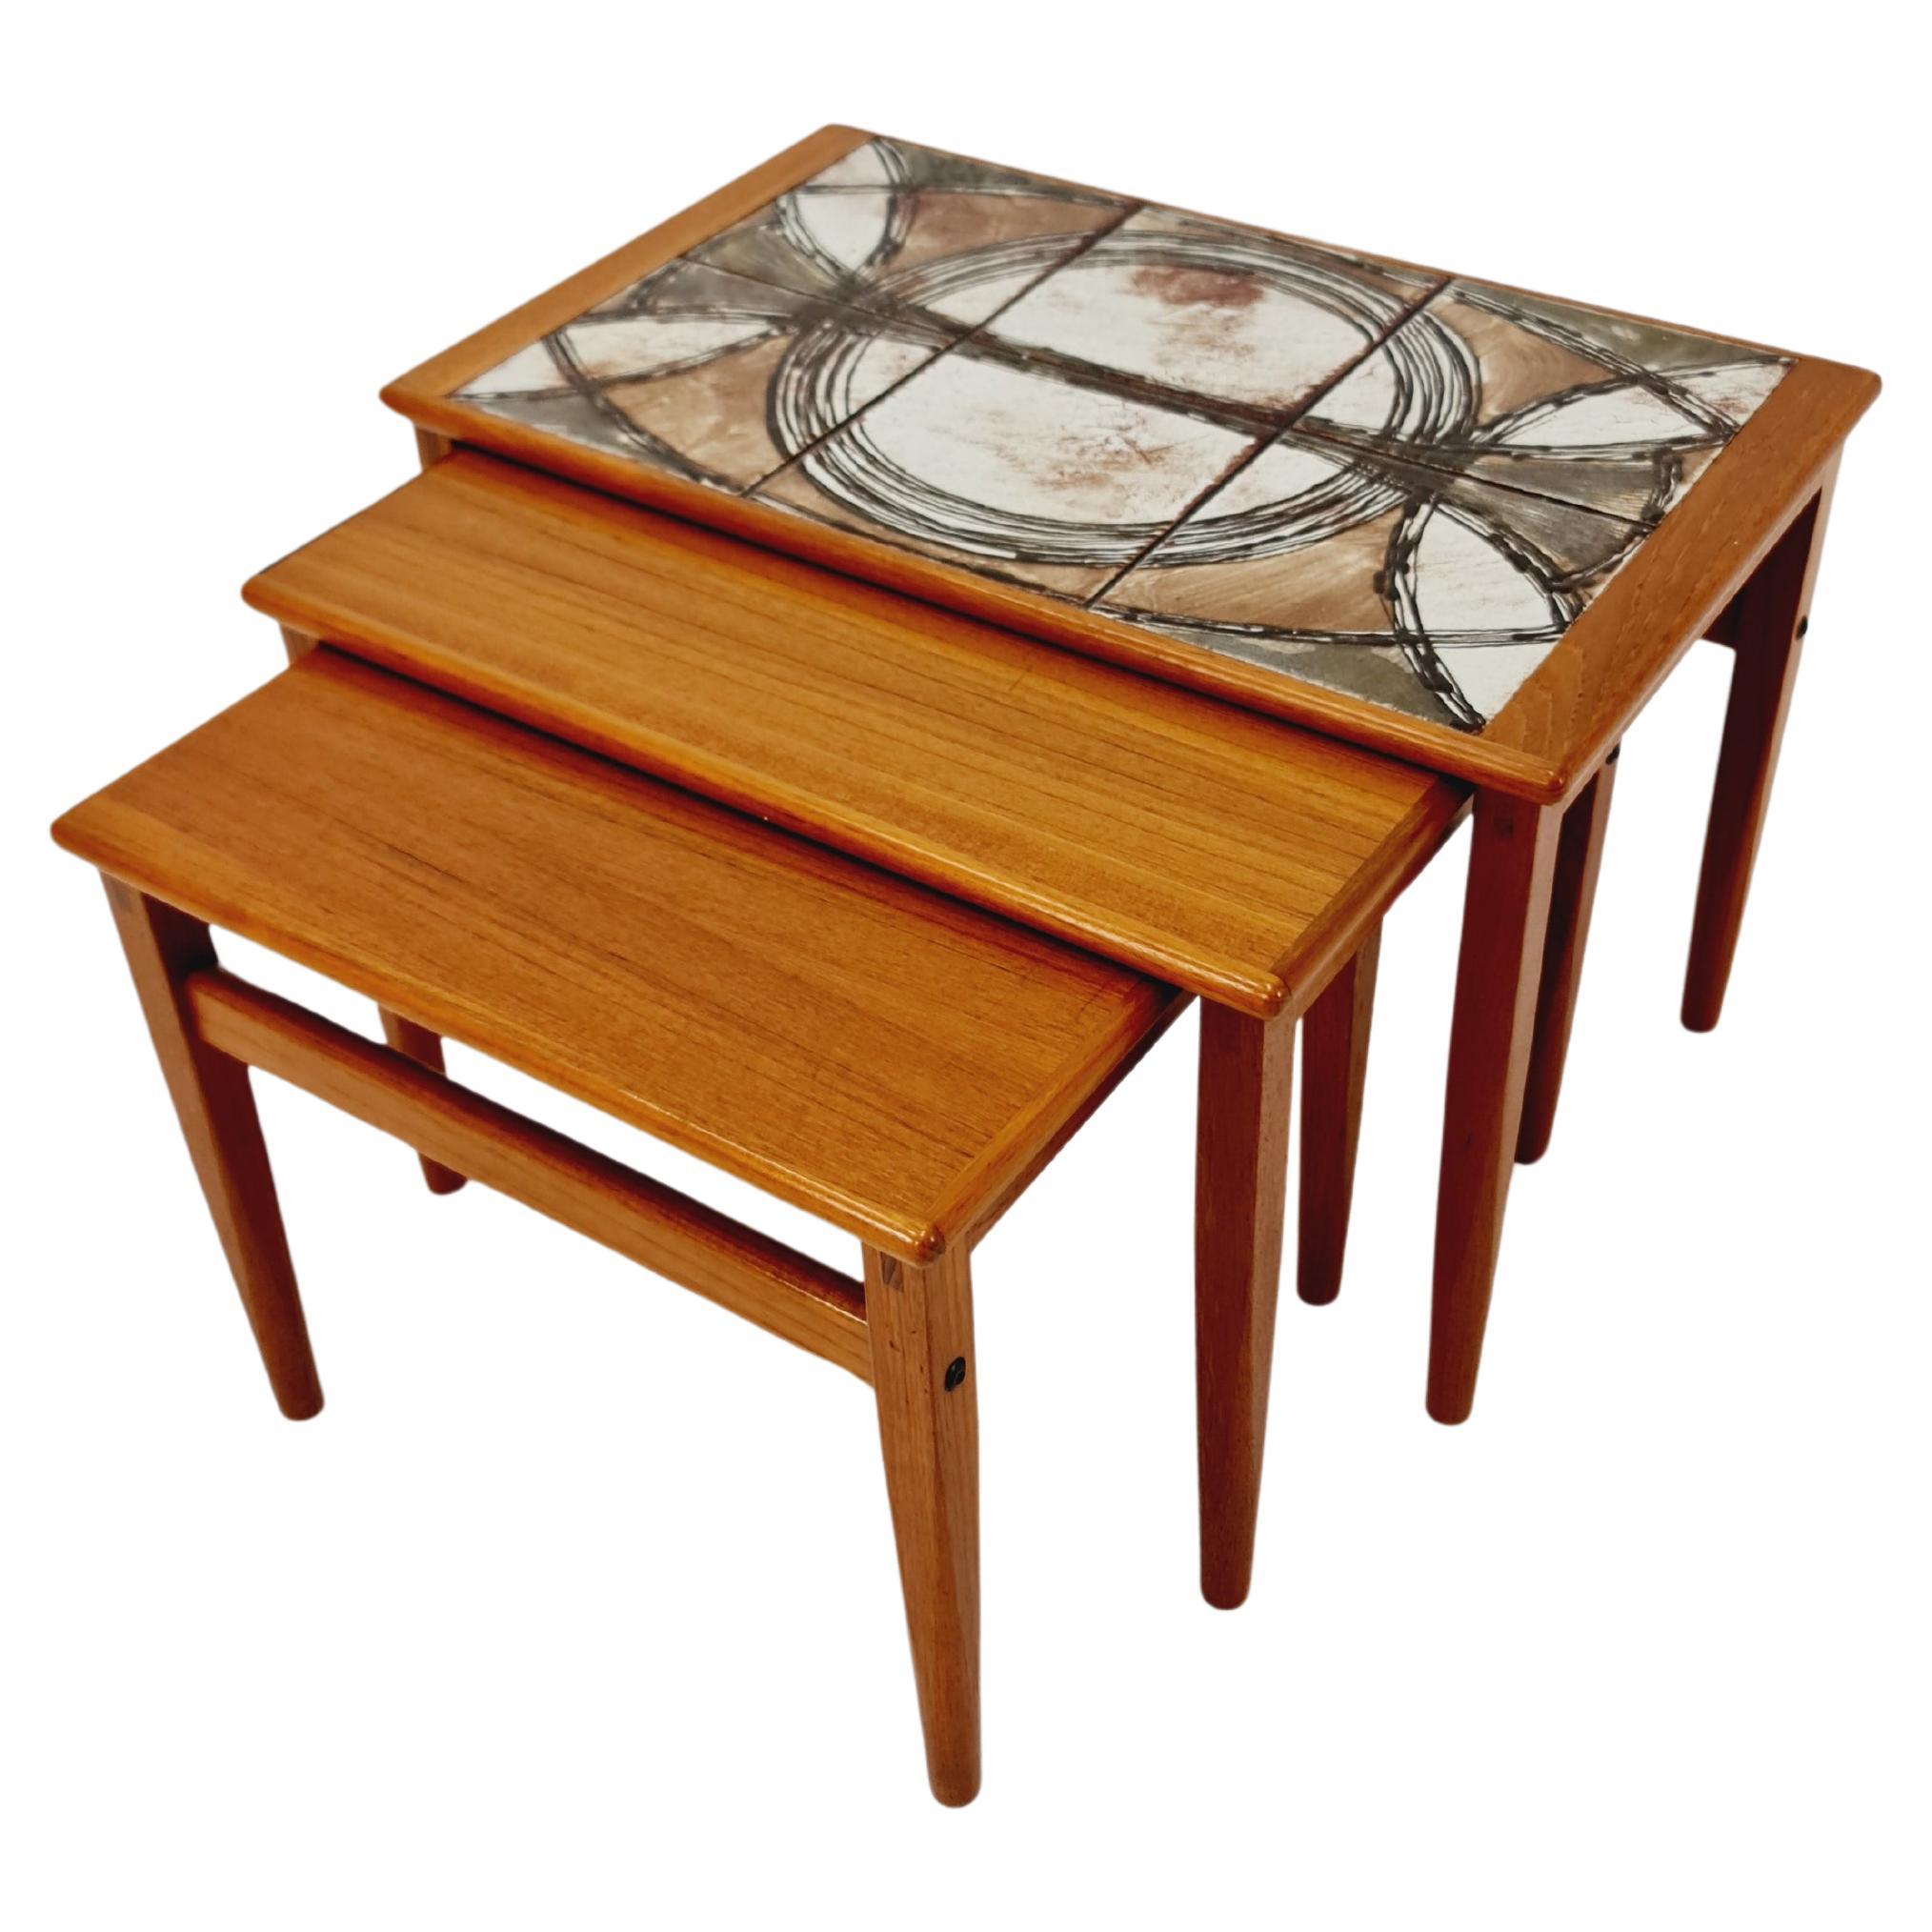 Midcentury danish teak + ceramic By OX Art  nesting tables/ side tables by Trioh